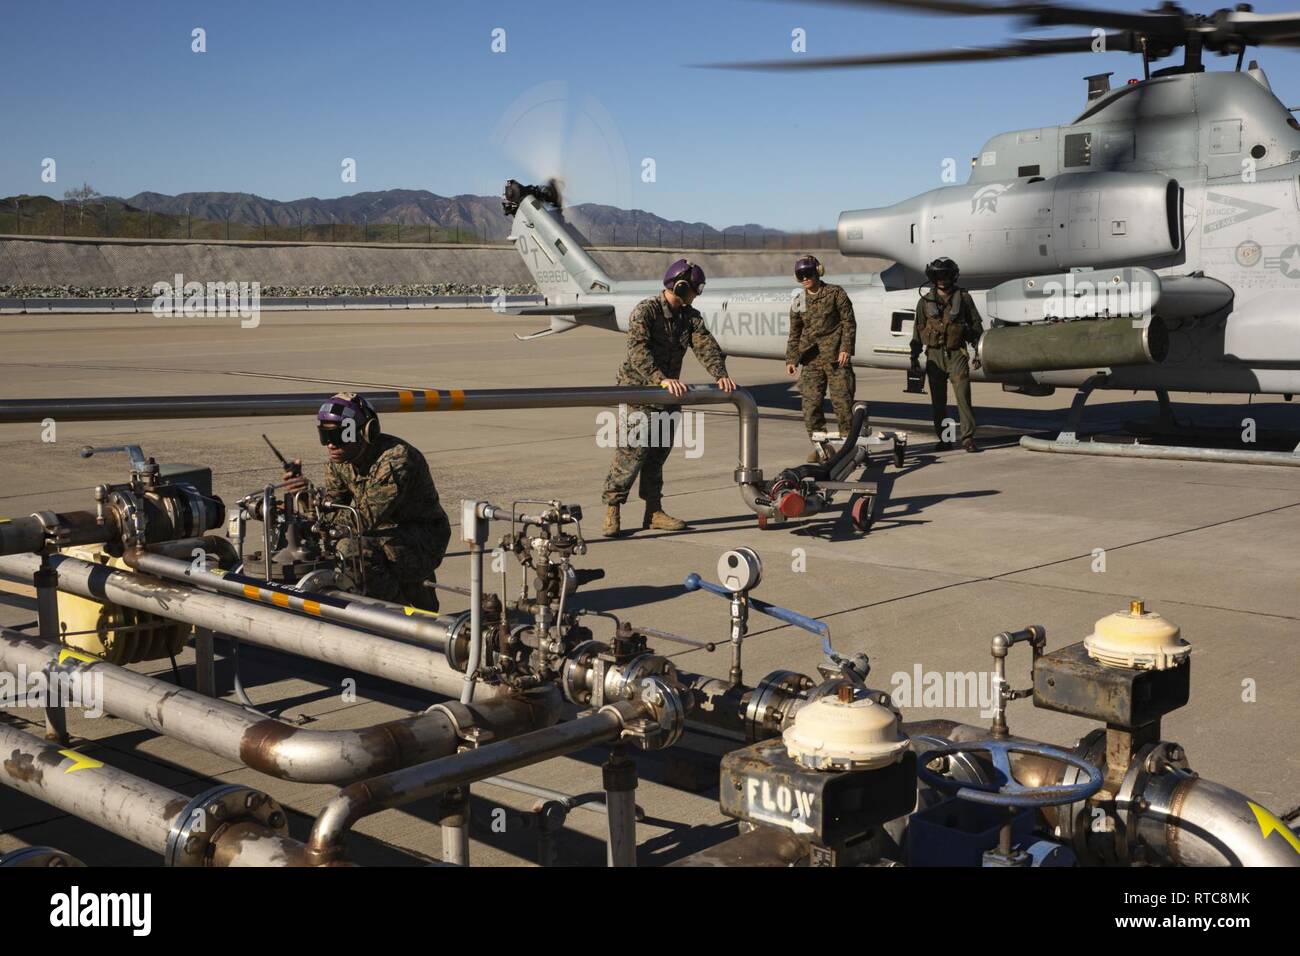 U.S. Marines with Headquarters & Headquarters Squadron, Marine Corps Air Station (MCAS) Camp Pendleton,refuel an AH-1Z Viper helicopter at MCAS Camp Pendleton, California, Feb. 11, 2019. MCAS Camp Pendleton Bulk Fuel Specialists receive, store and dispense fuel to aircraft supported by the air station. Stock Photo